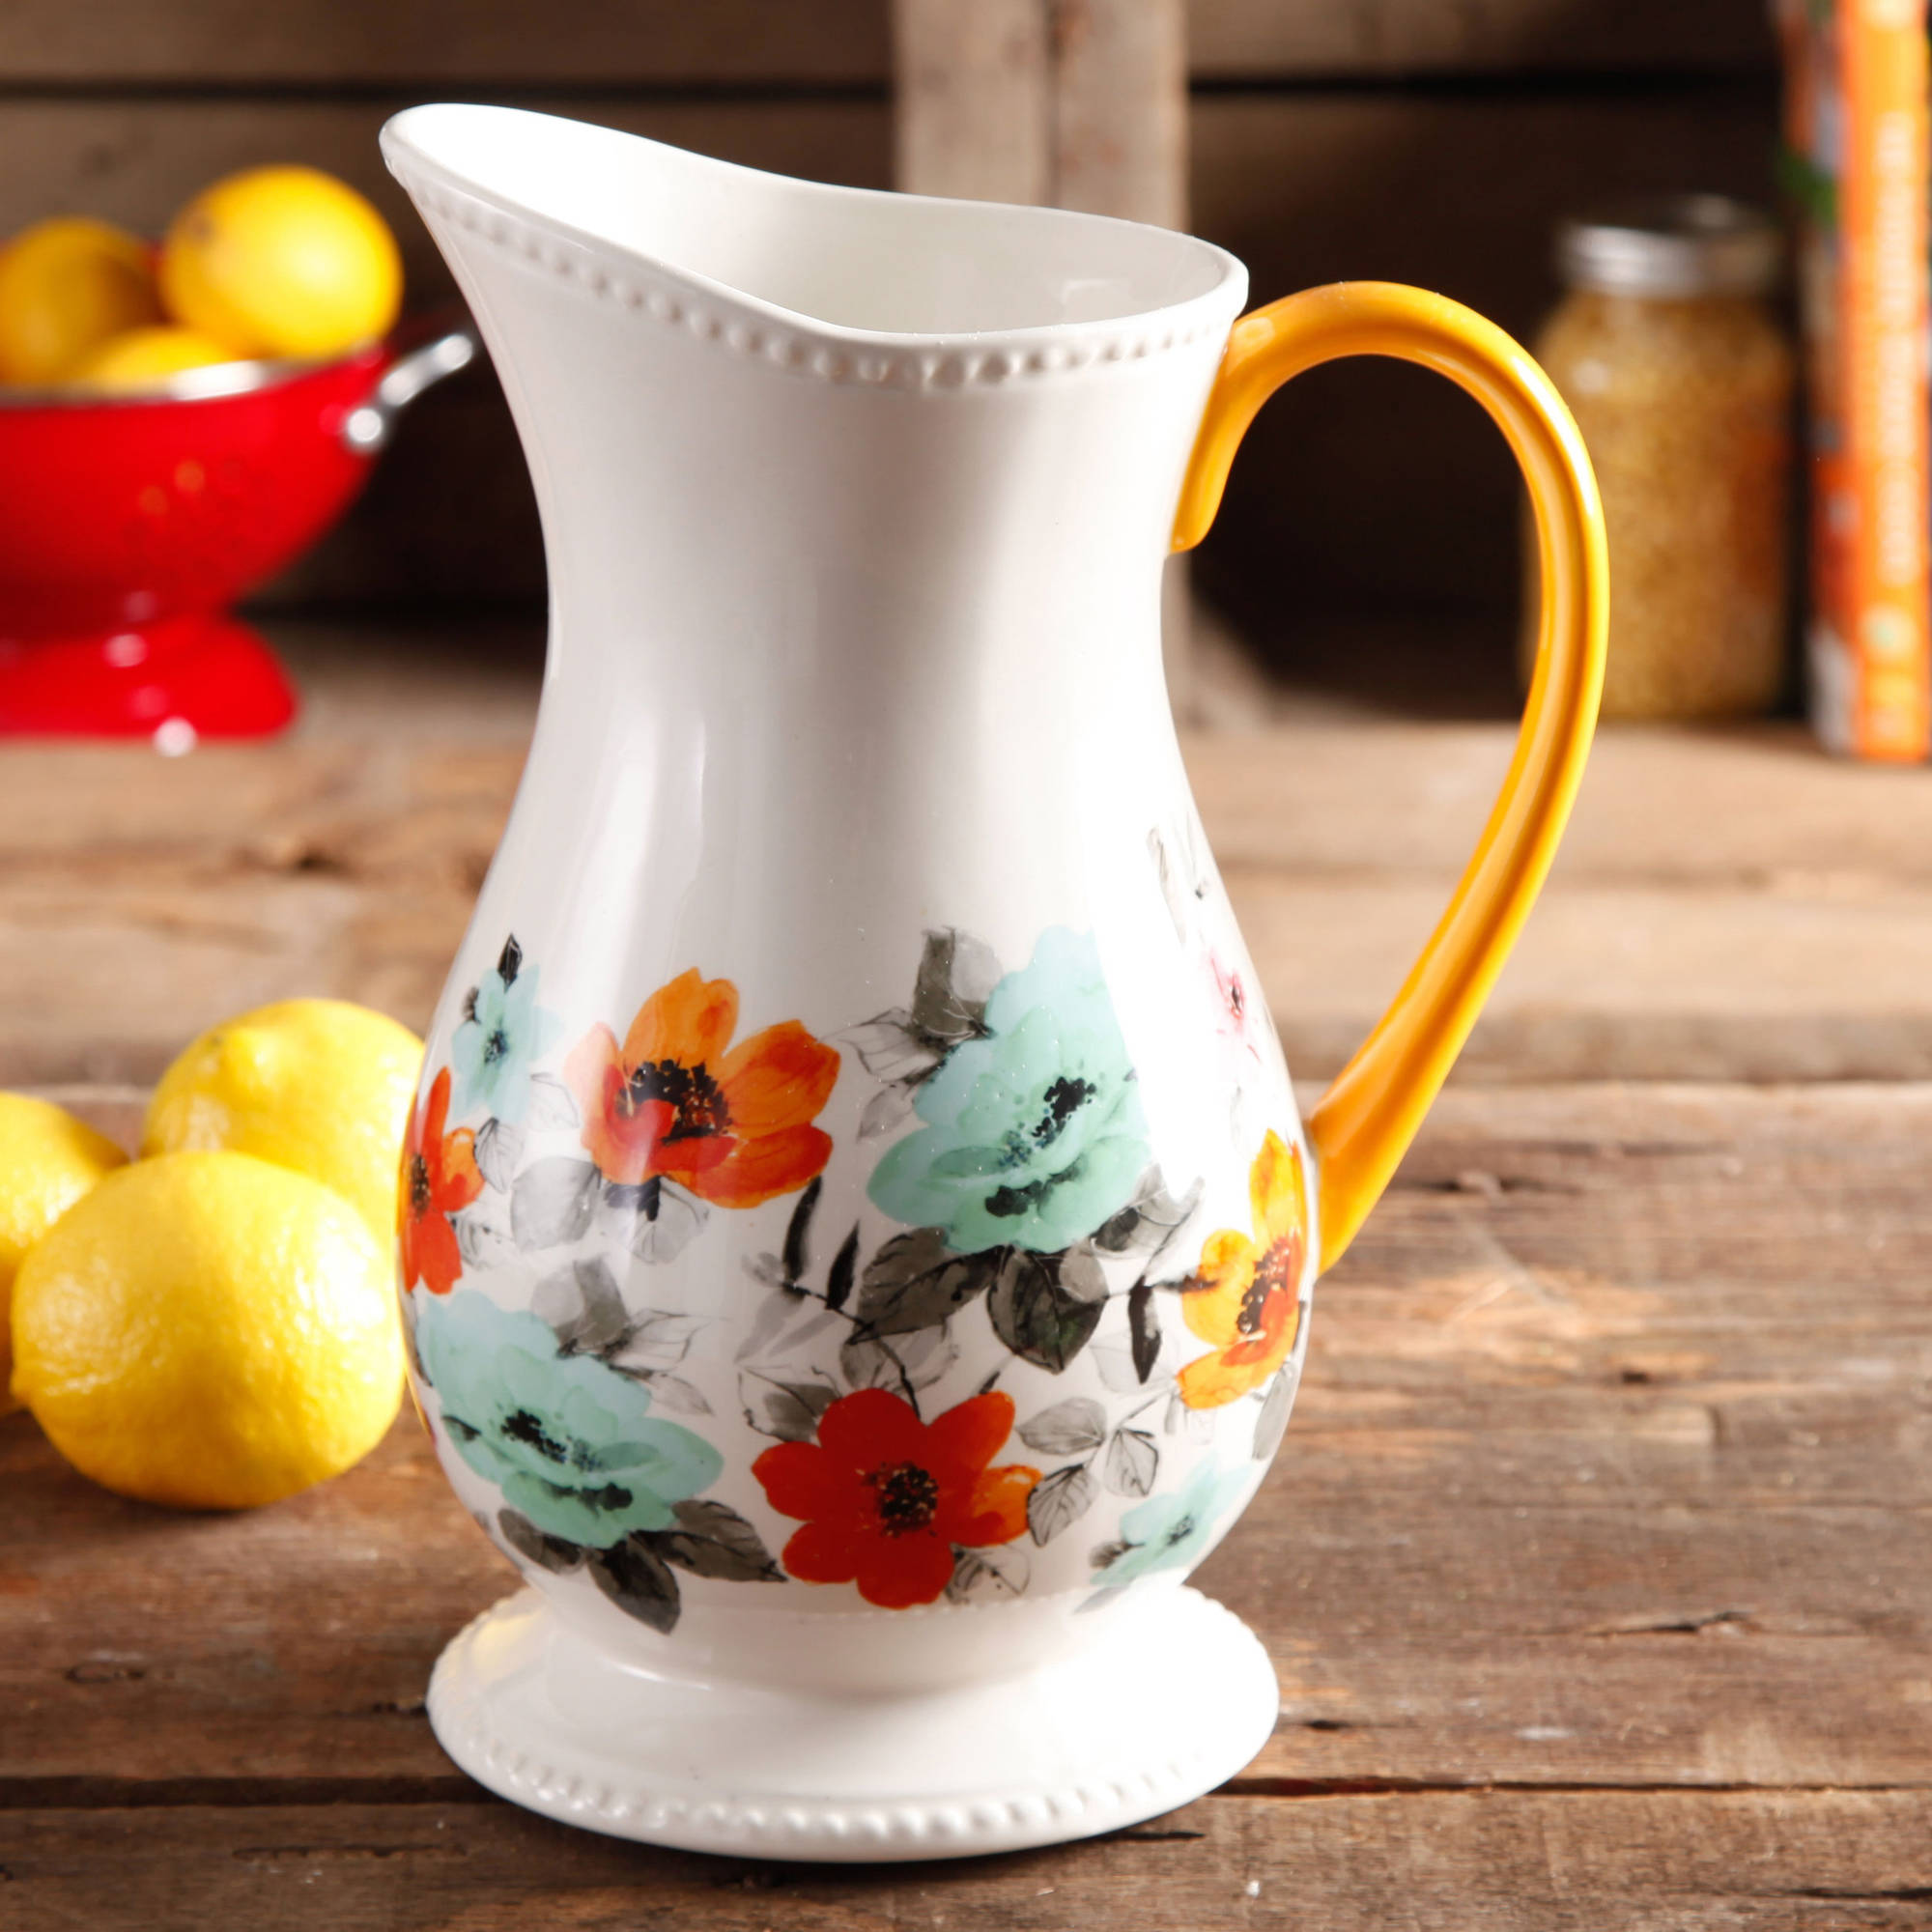 The Pioneer Woman Flea Market White Decorated Floral 2-Quart Pitcher - image 1 of 7